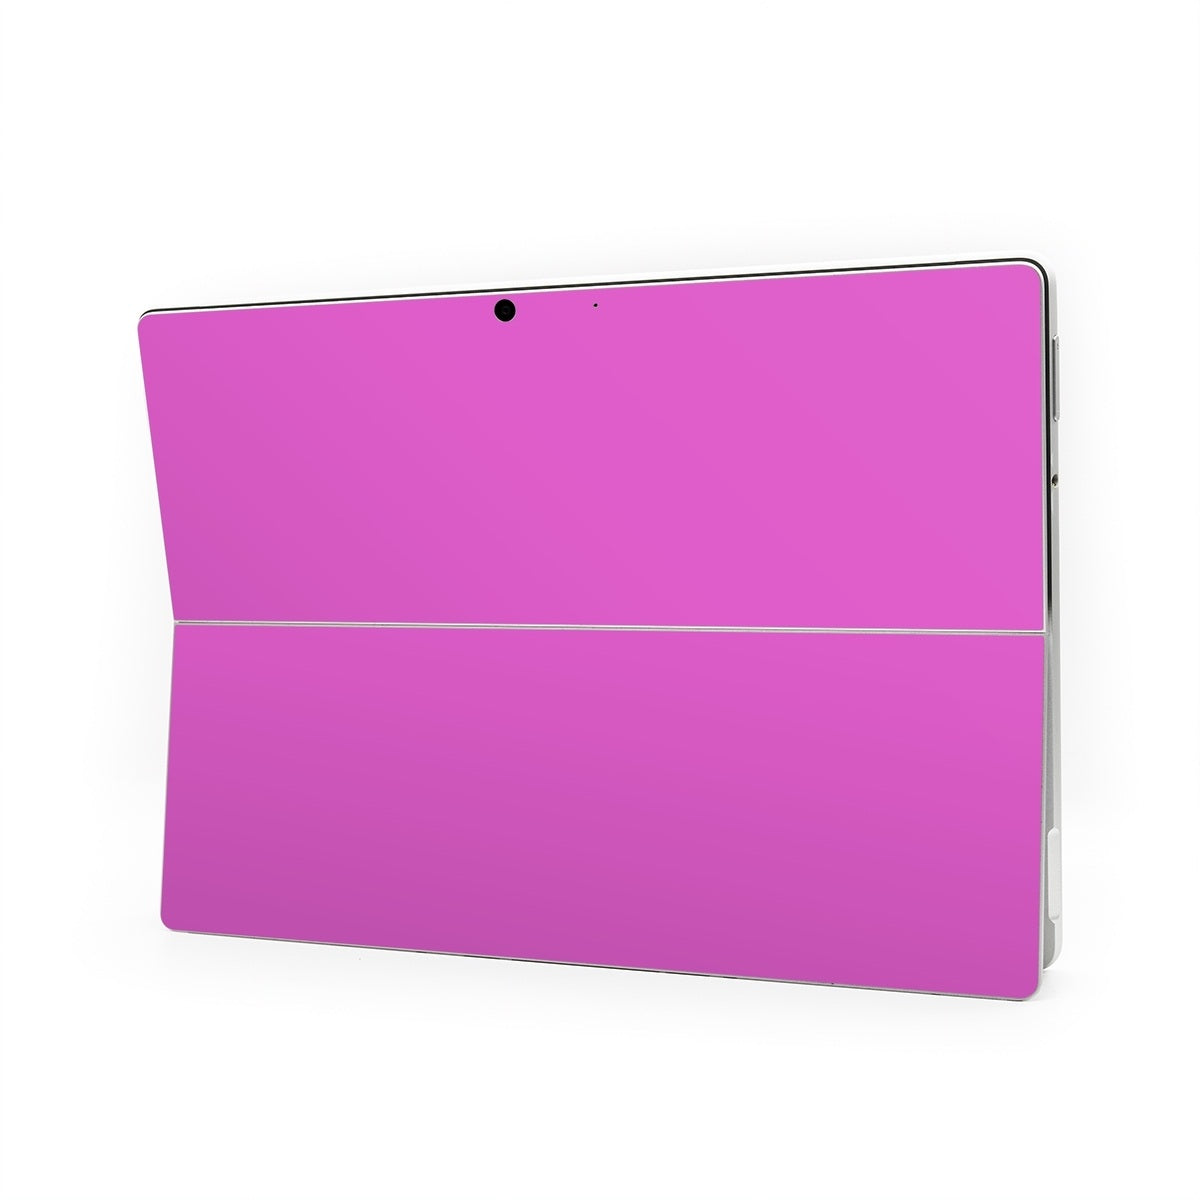 Solid State Vibrant Pink - Microsoft Surface Pro Skin